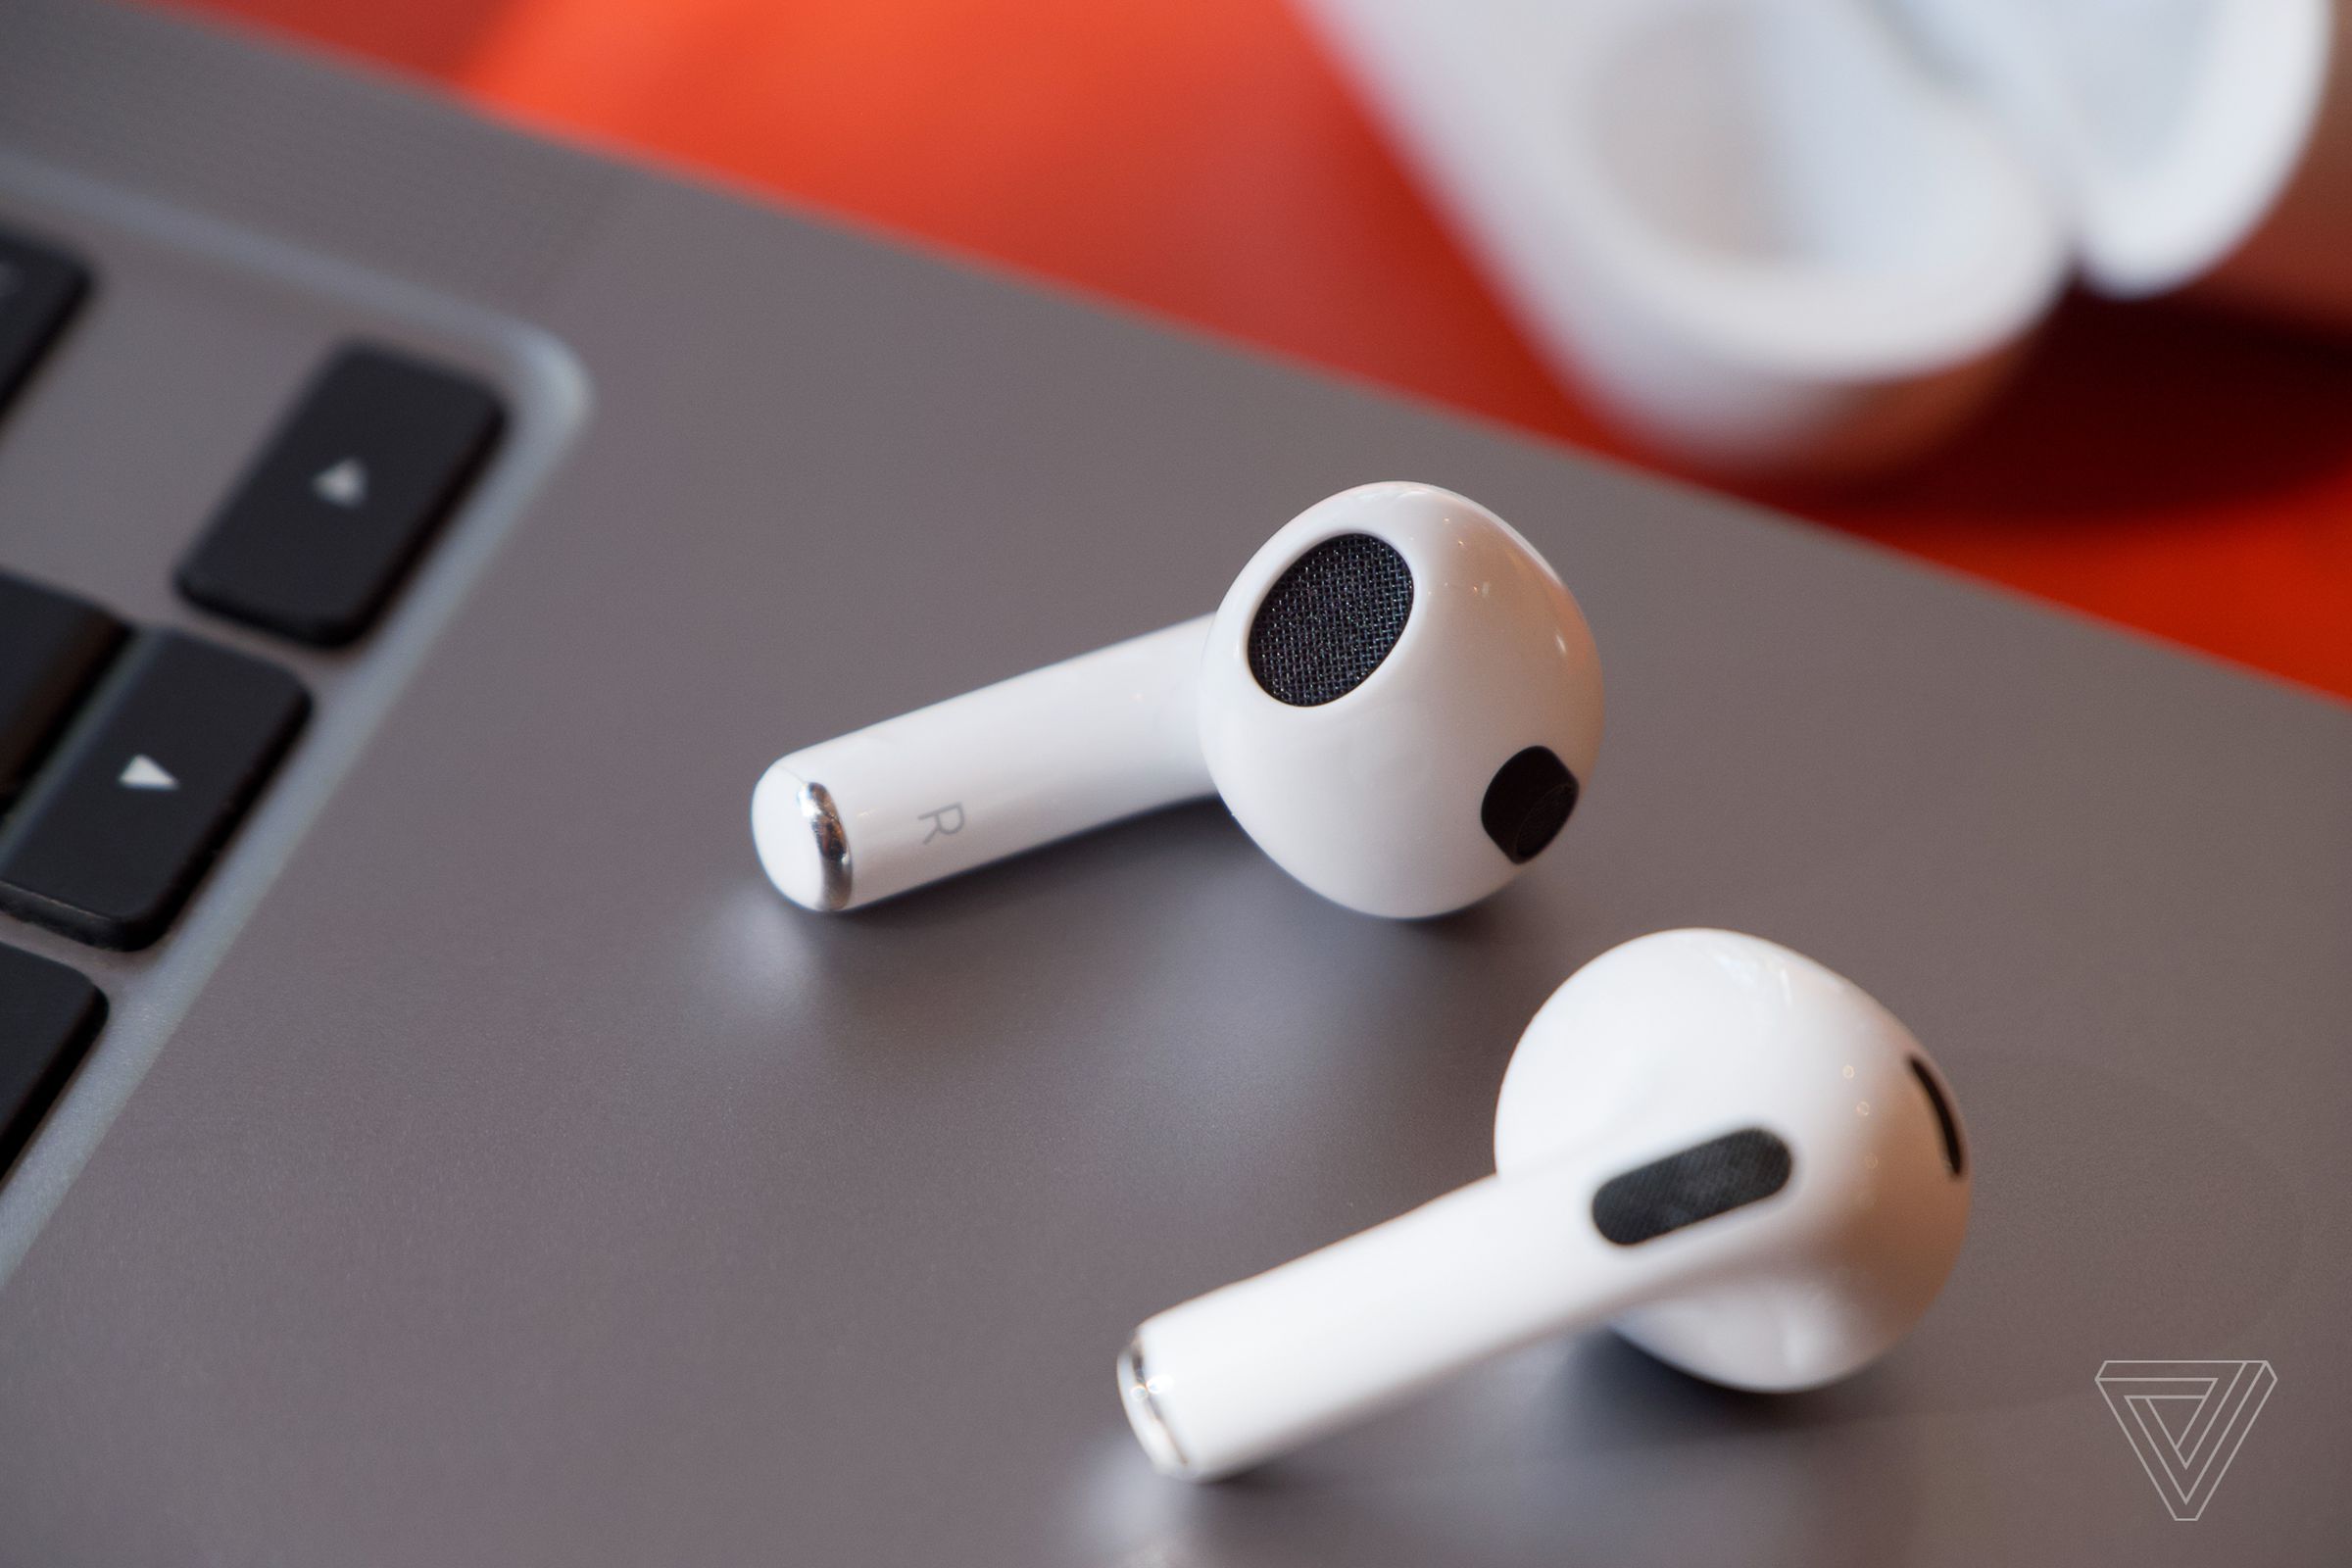 The third-gen AirPods bear a closer resemblance to the AirPods Pro than the second-gen model.